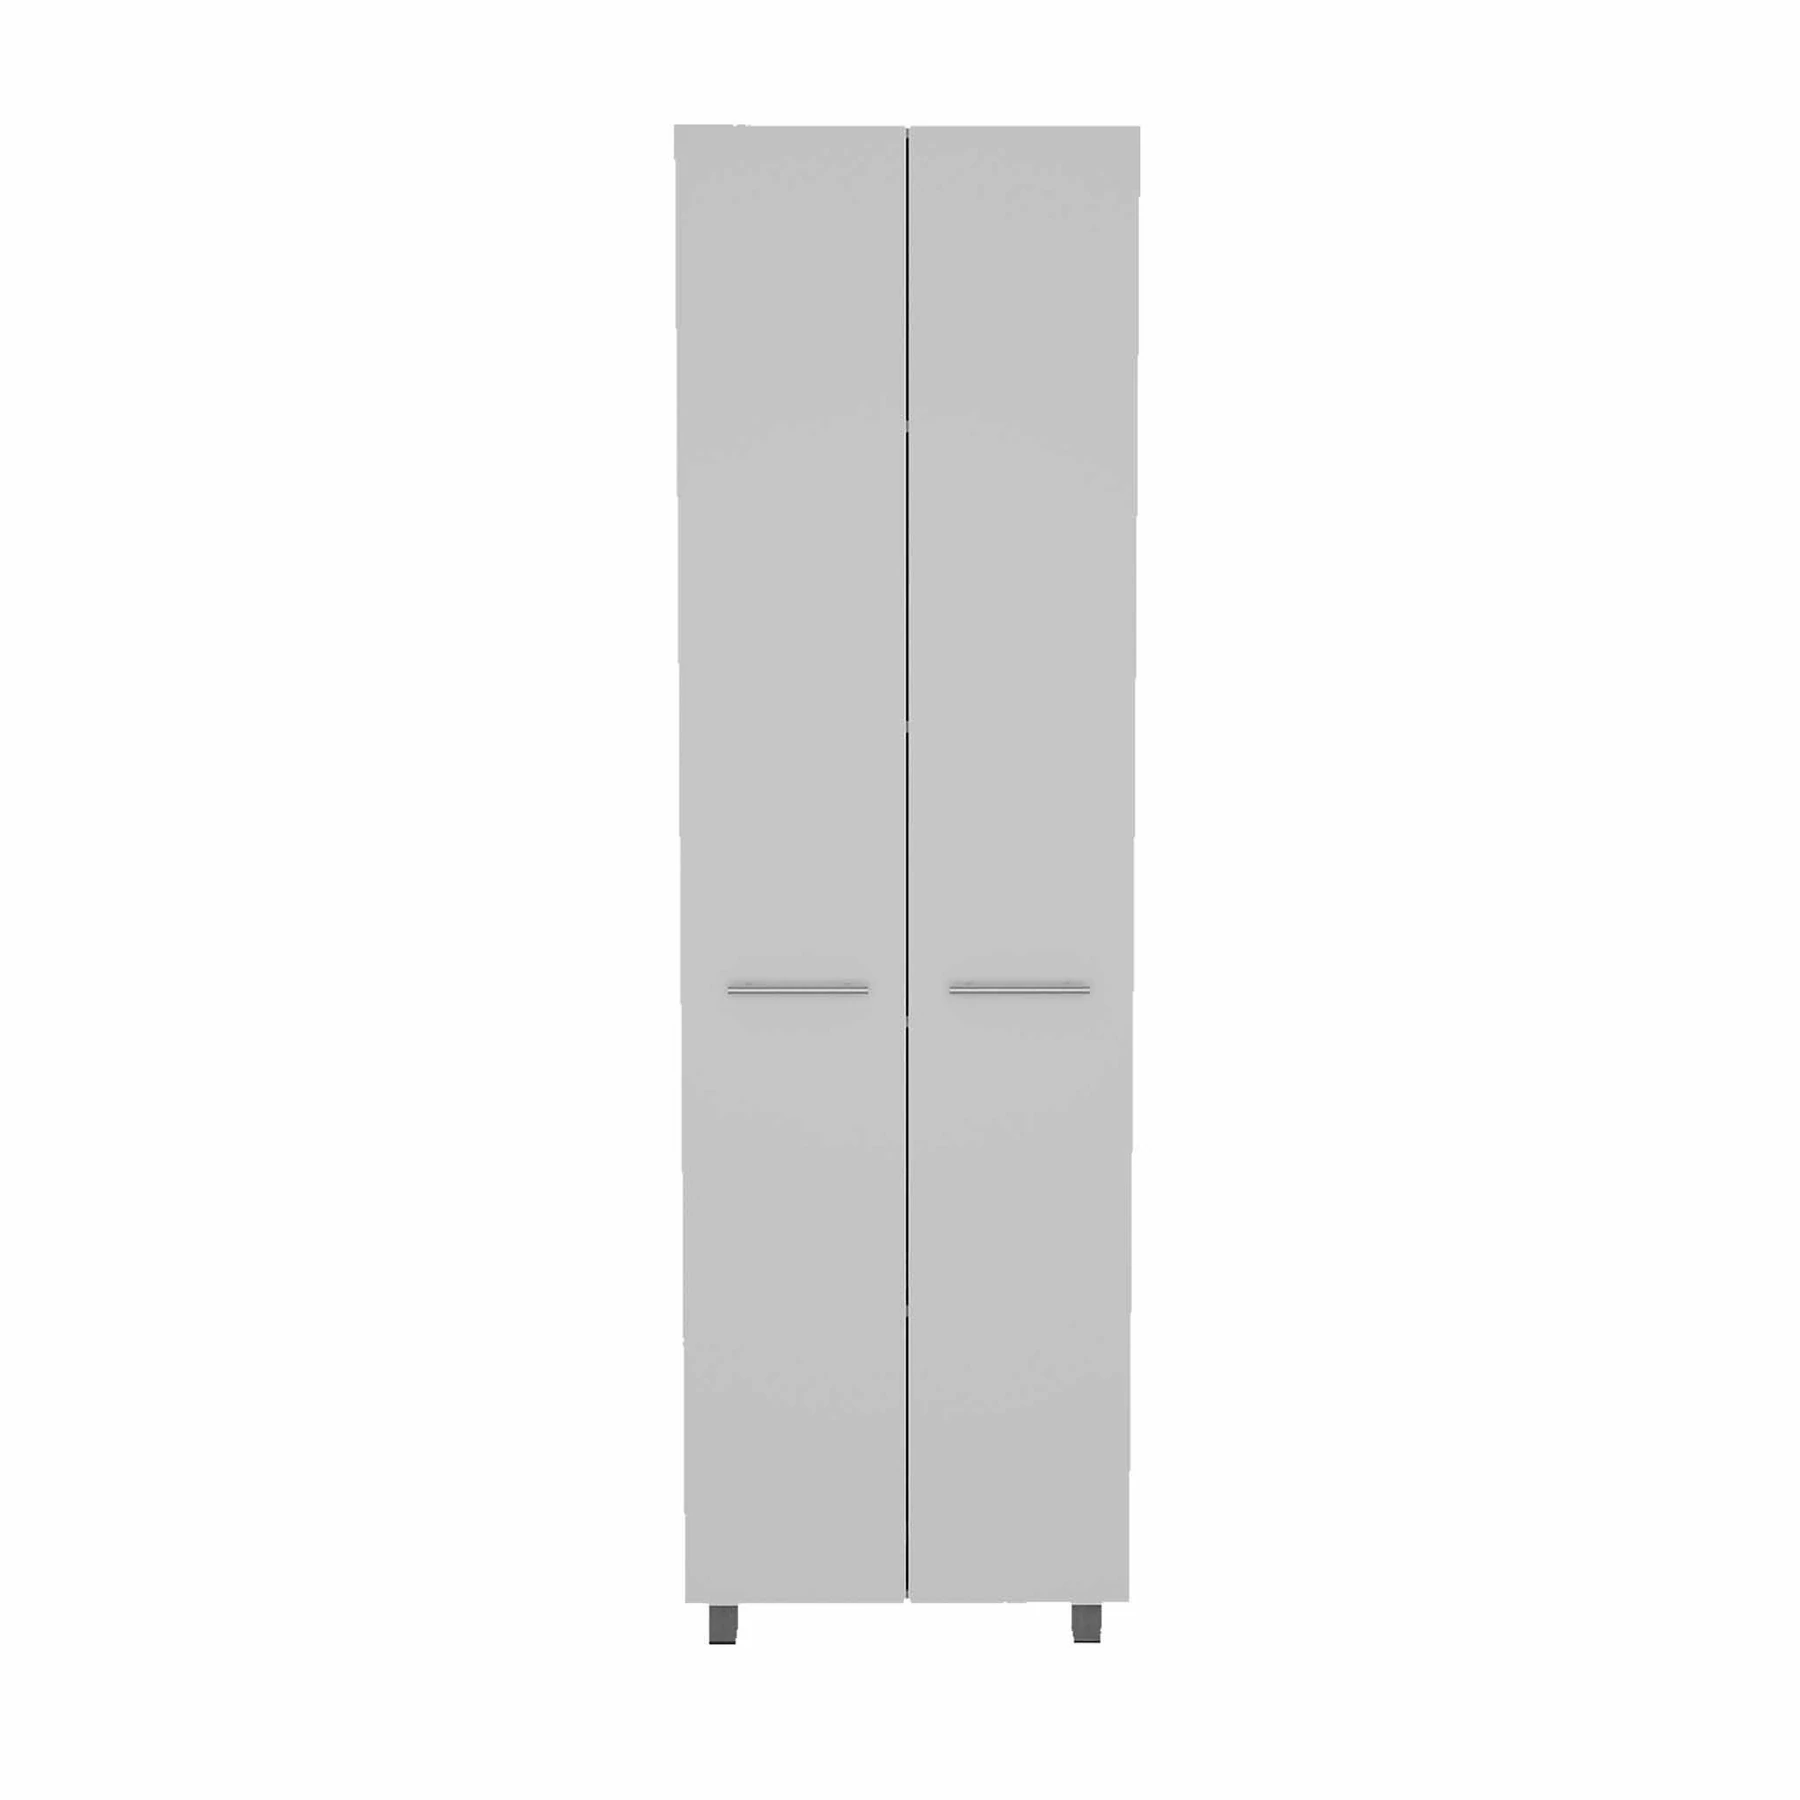 TUHOME Baleare Pantry Cabinet, Five Internal Shelves, Four Legs, Two Handles, White, For Kitchen Room